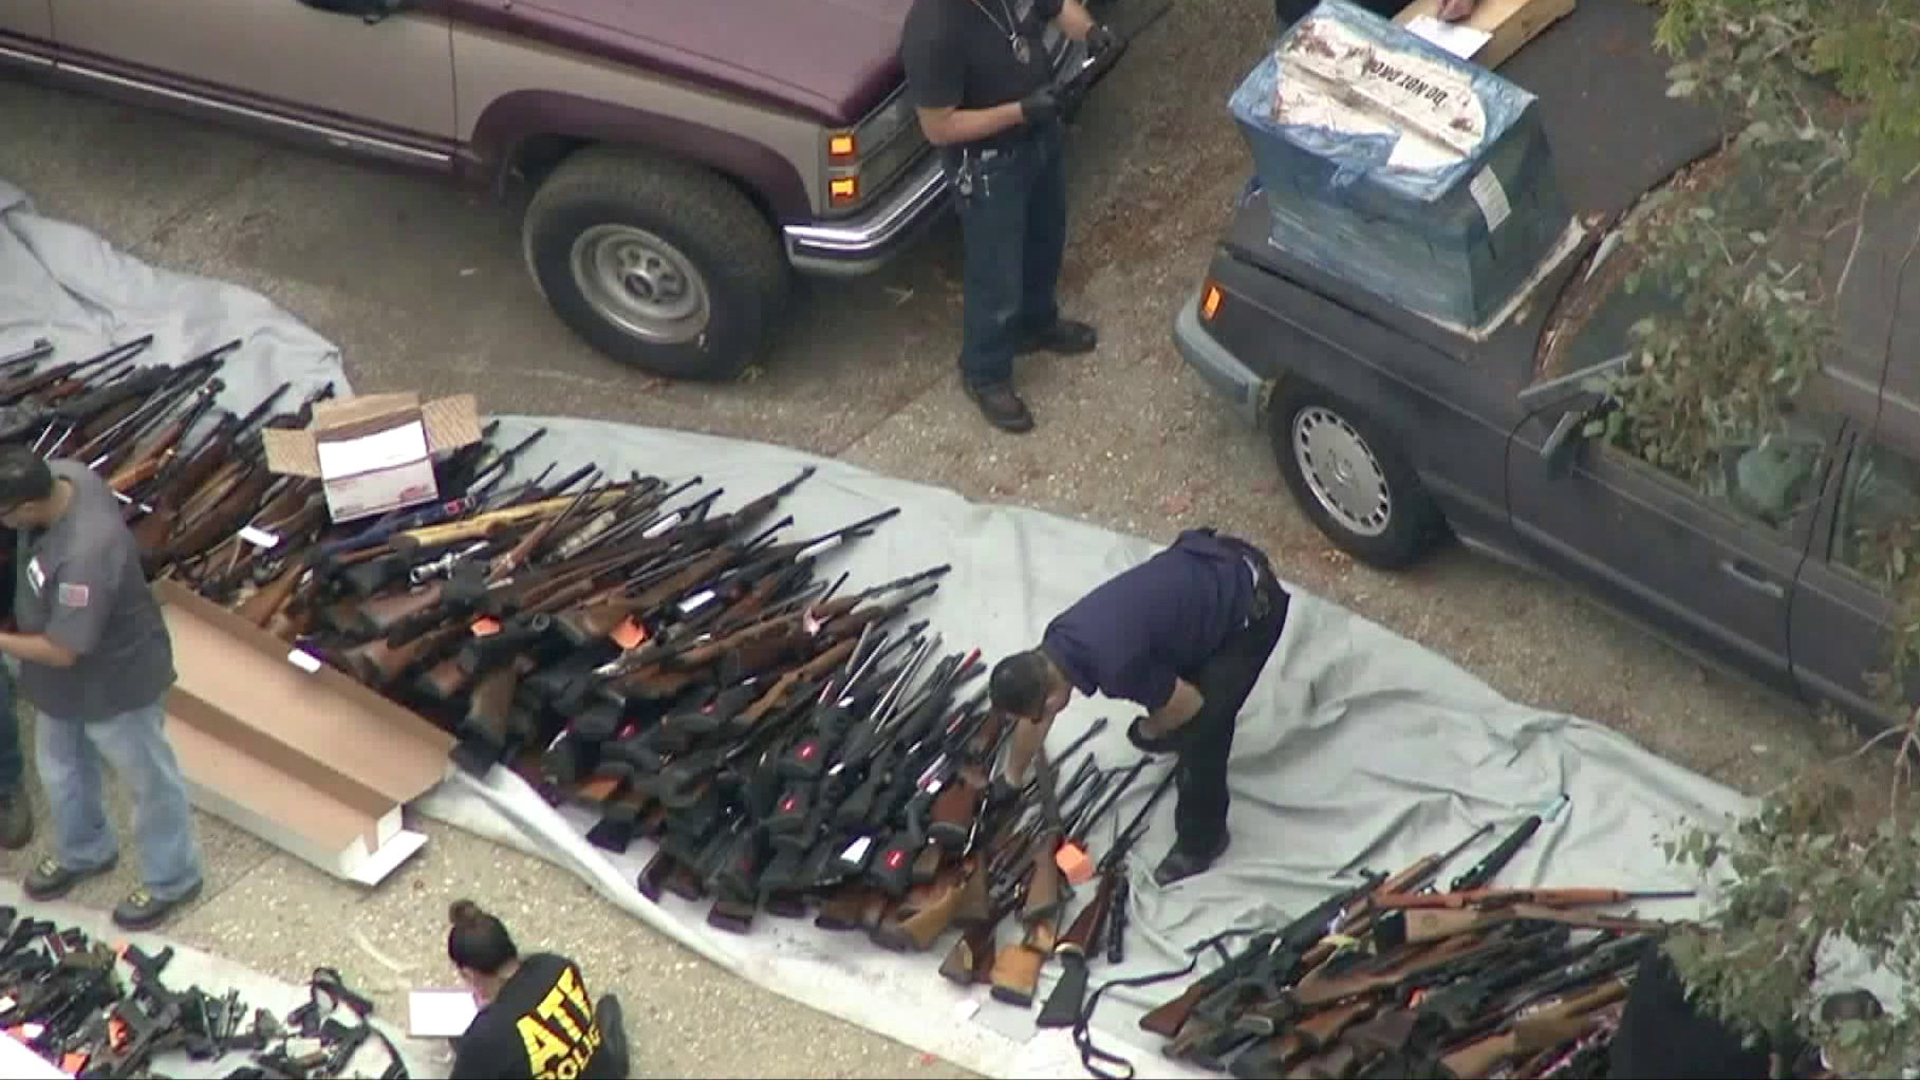 Hundreds of guns were seized from a Bel-Air mansion on May 8, 2019. (Credit: KTLA)